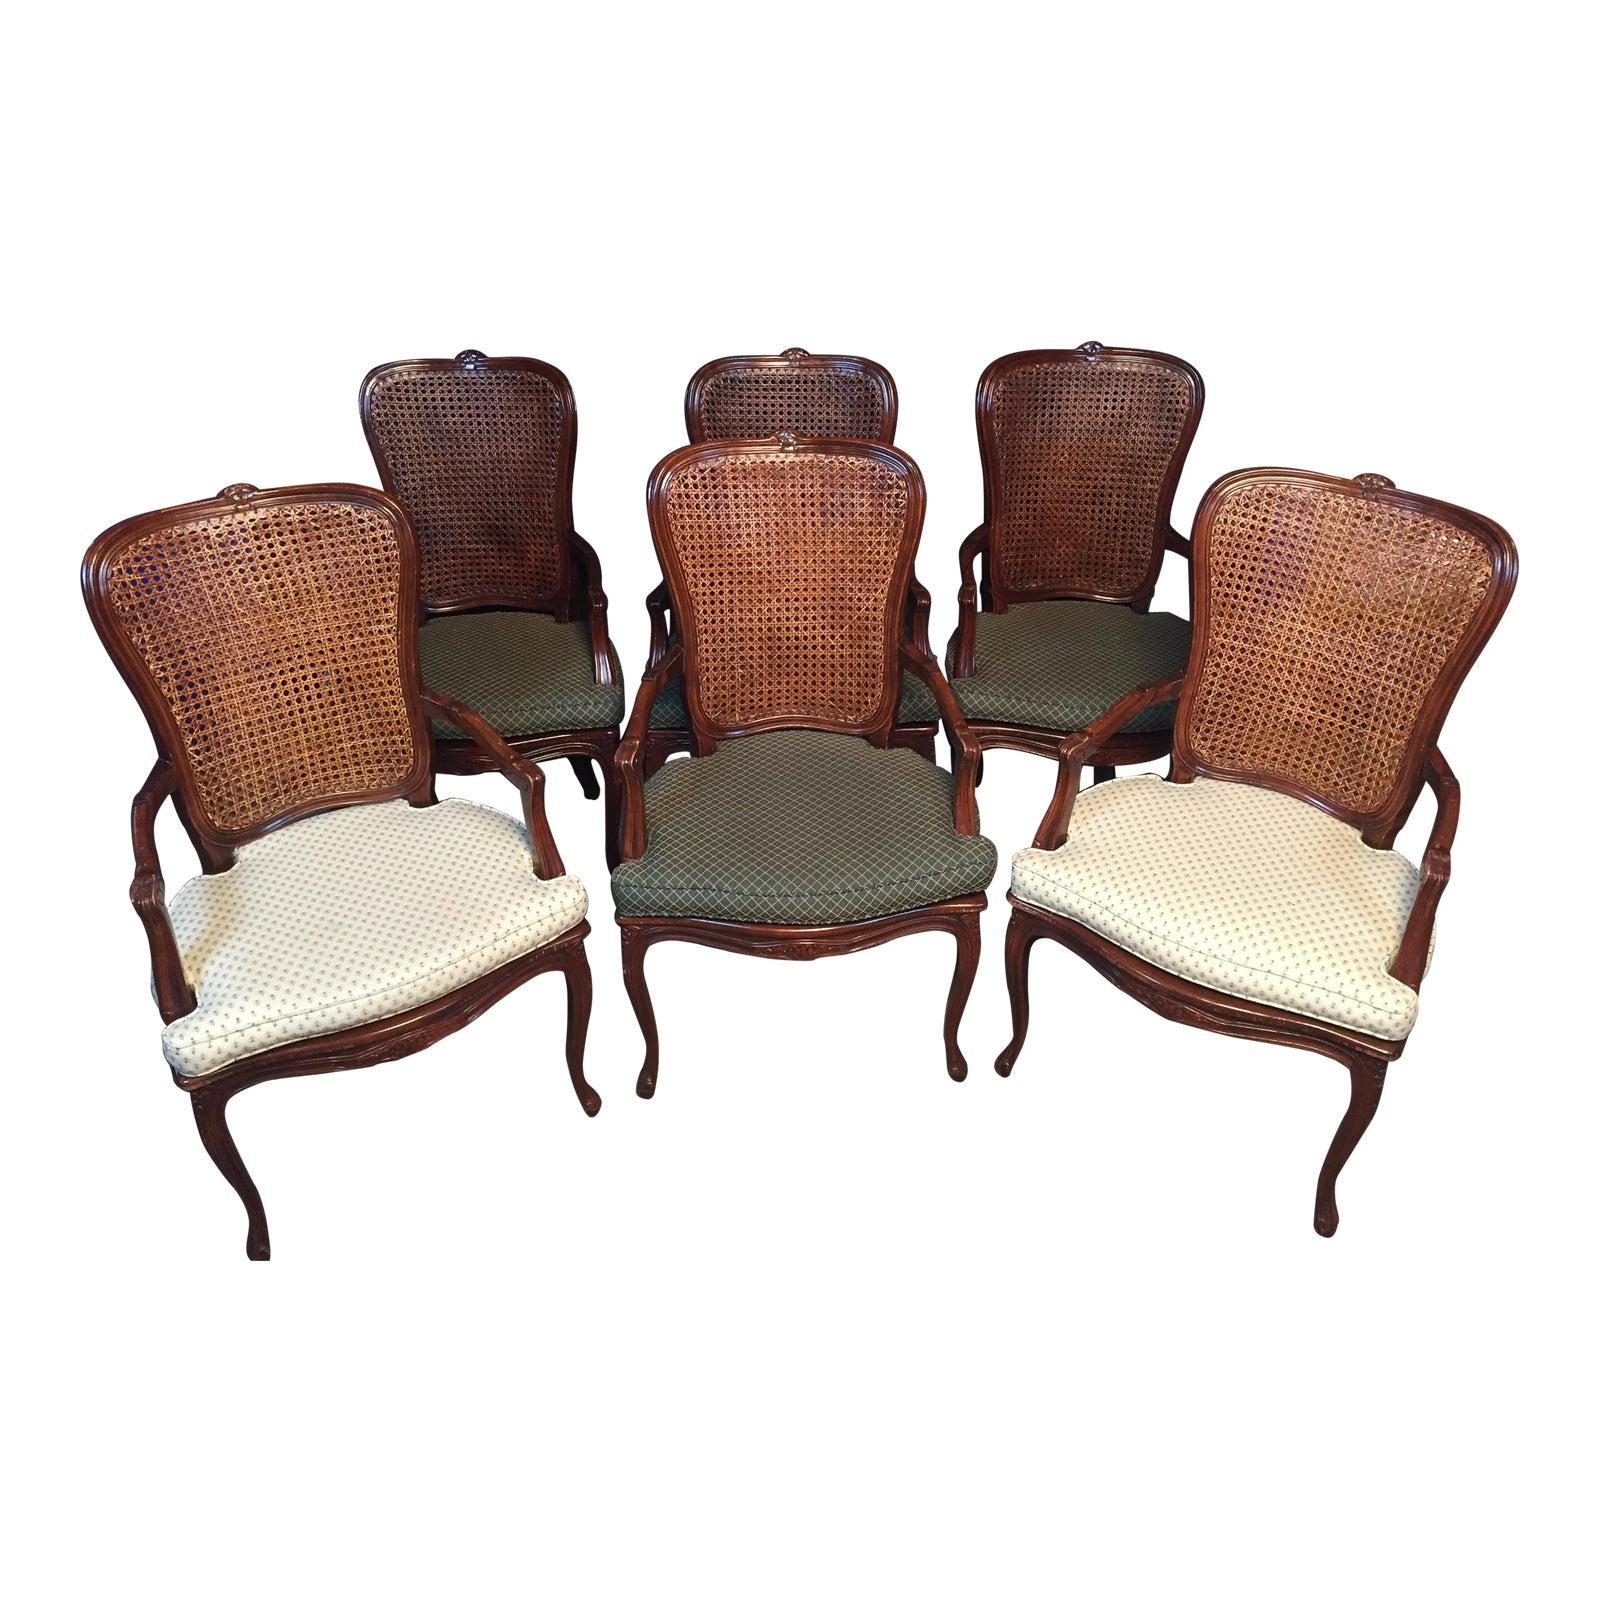 Set of 6 Carved Wood and Caned Dining Arm Chairs With Green and White Cusions